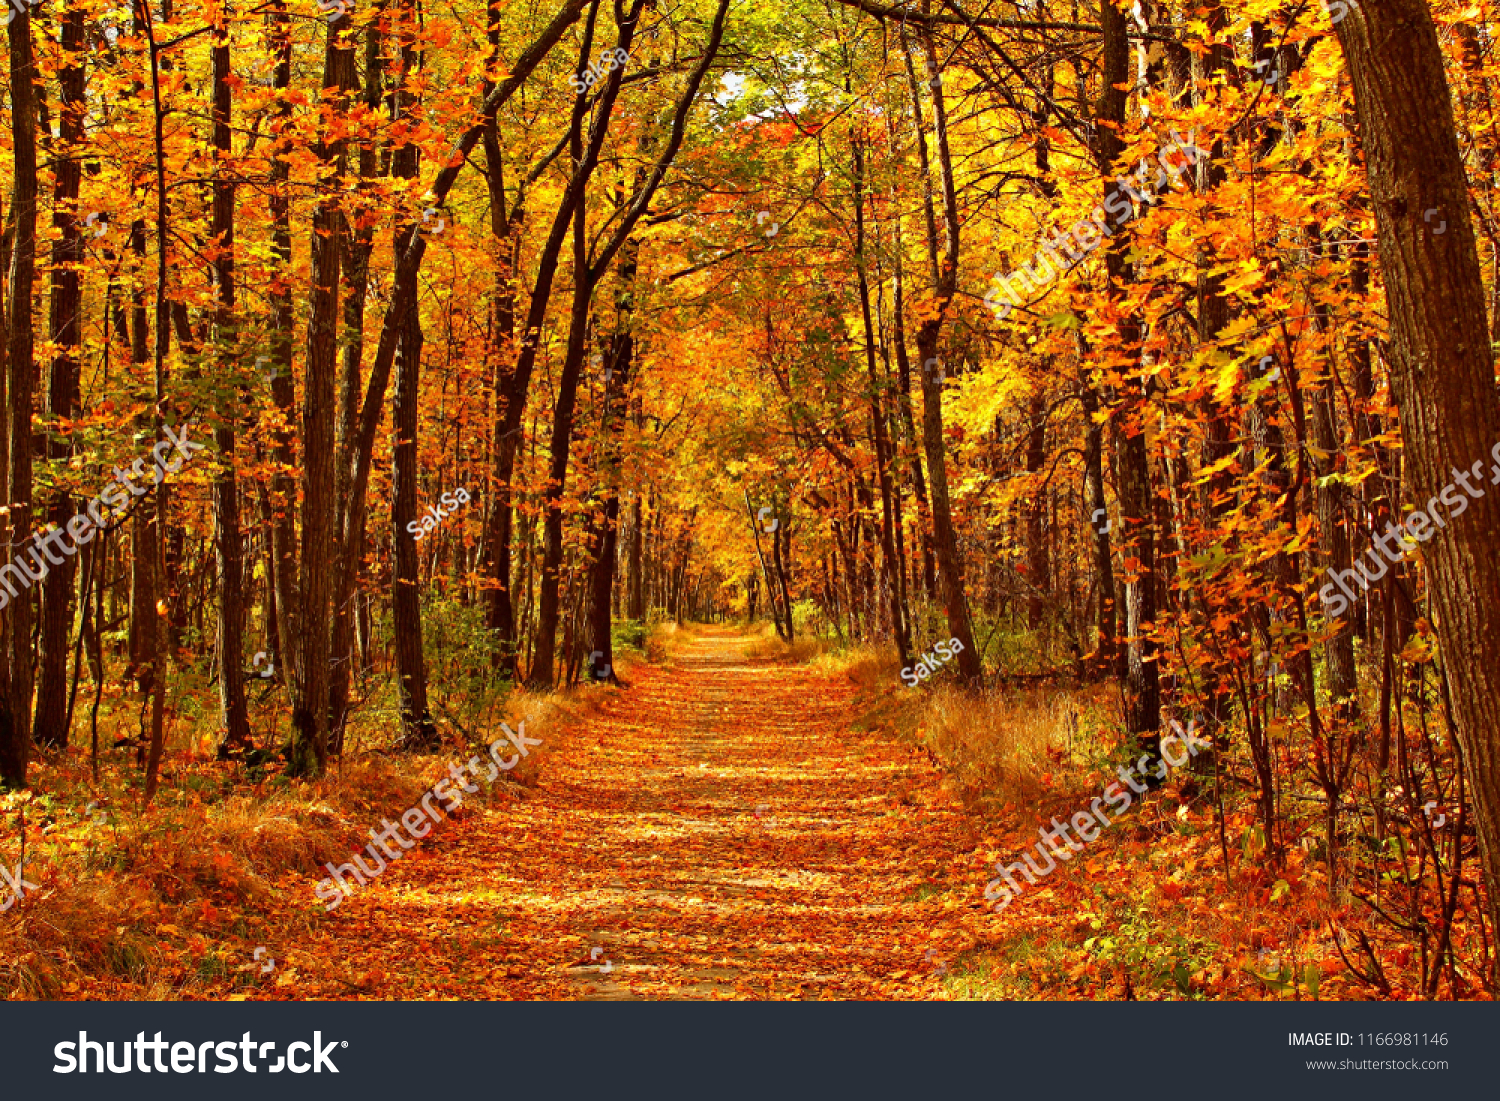 Autumn forest scenery with road of fall leaves & warm light illumining the gold foliage. Footpath in scene autumn forest nature. Vivid october day in colorful forest, maple autumn trees road fall way #1166981146